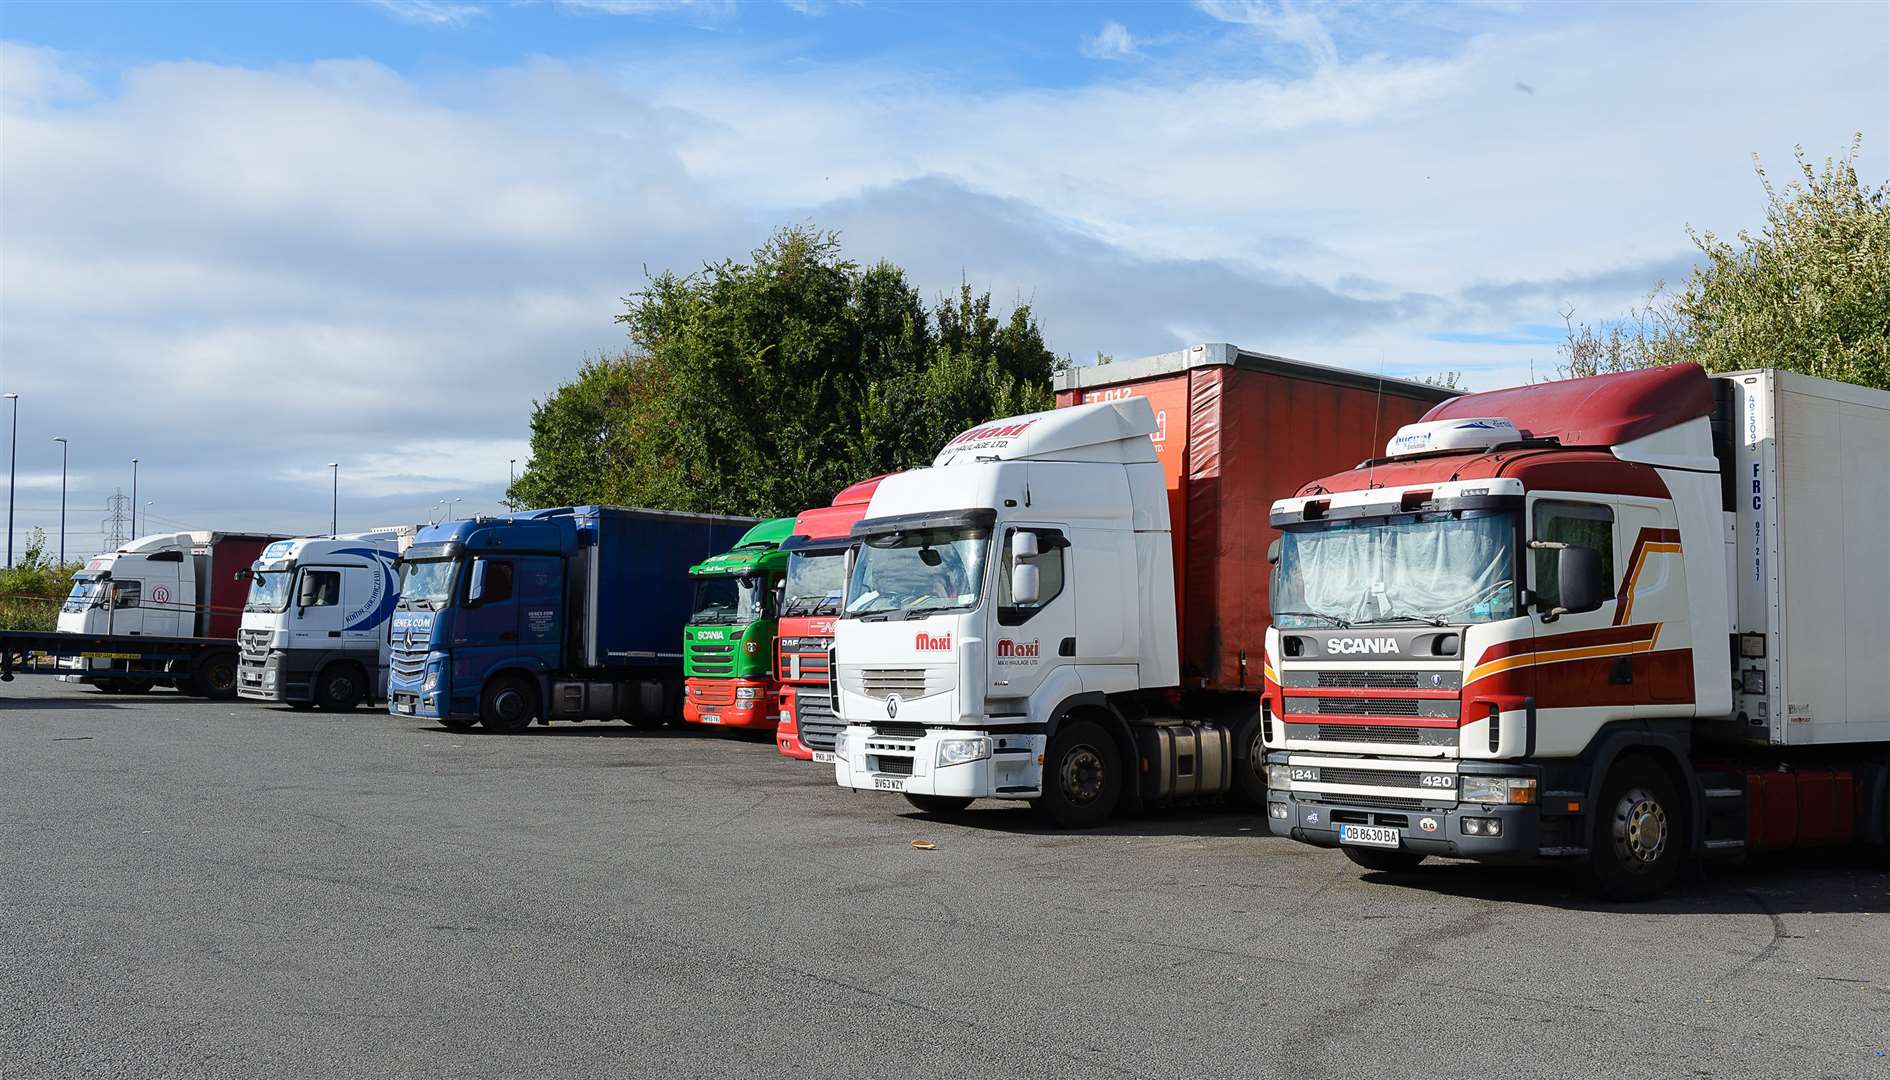 ABC leader Gerry Clarkson says a permanent lorry park is not something the authority would support in "any way, shape or form"